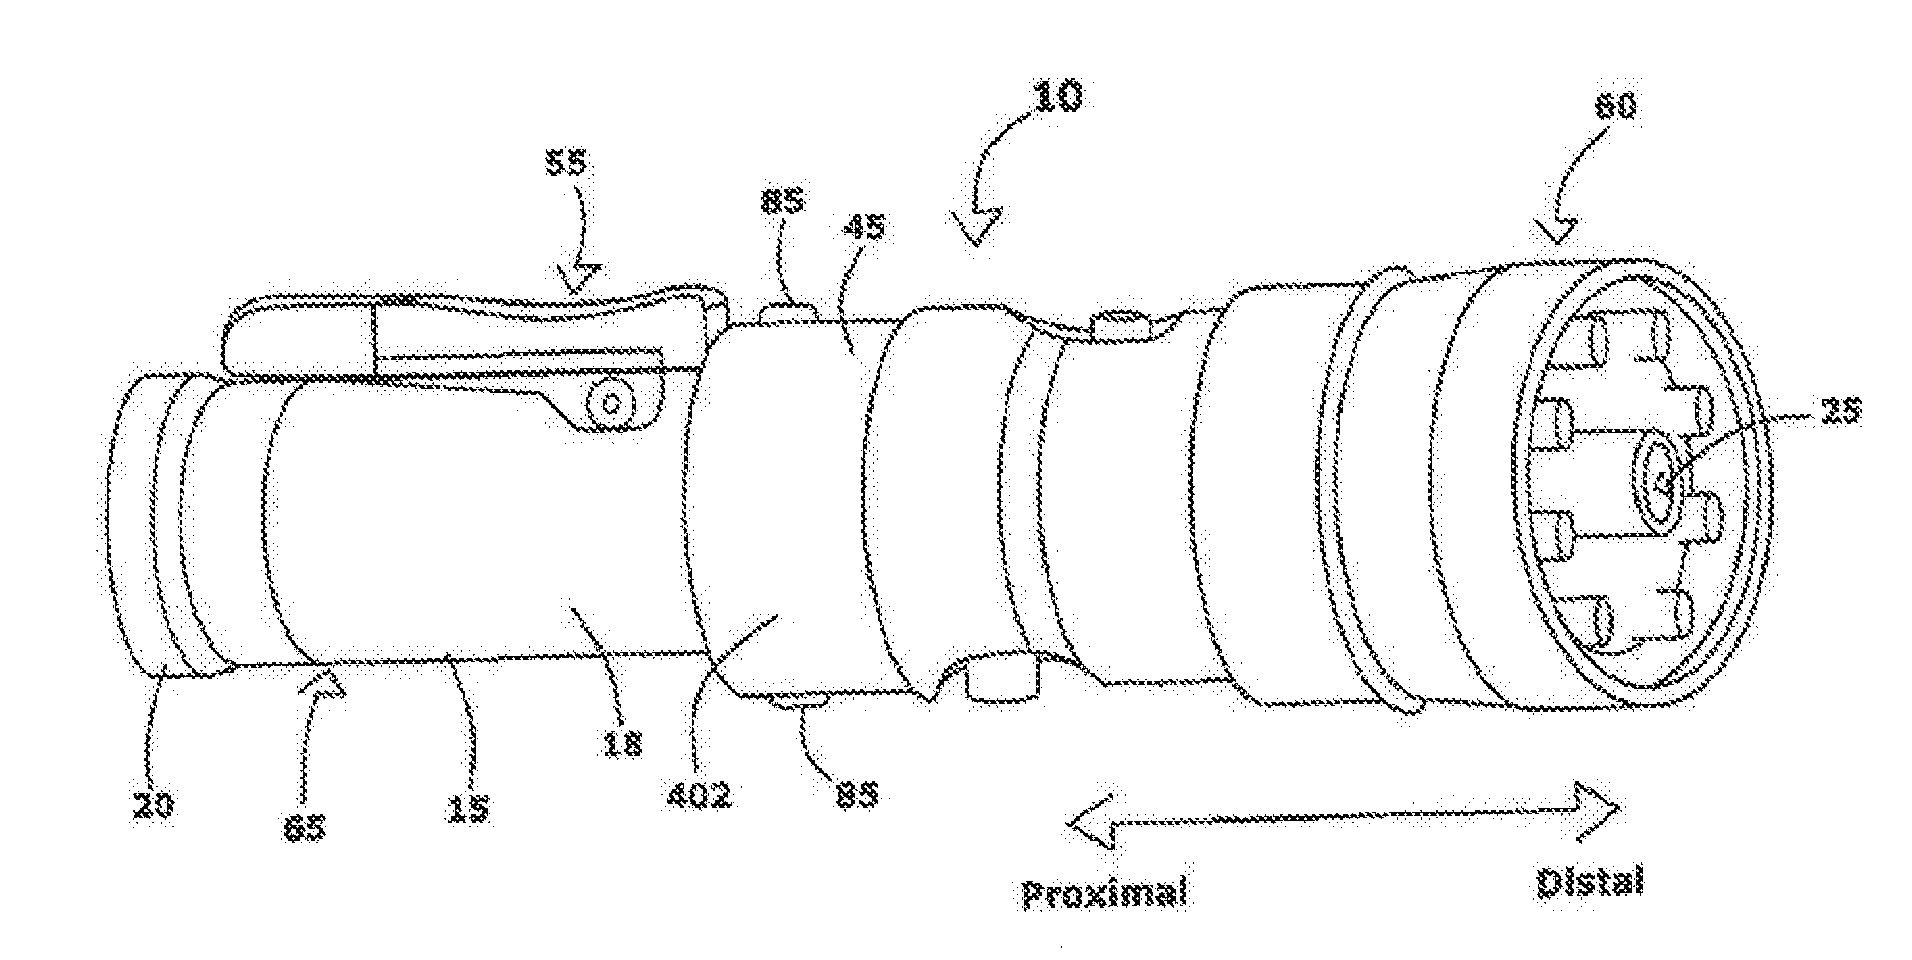 Systems and methods for providing a multi-shot firearm